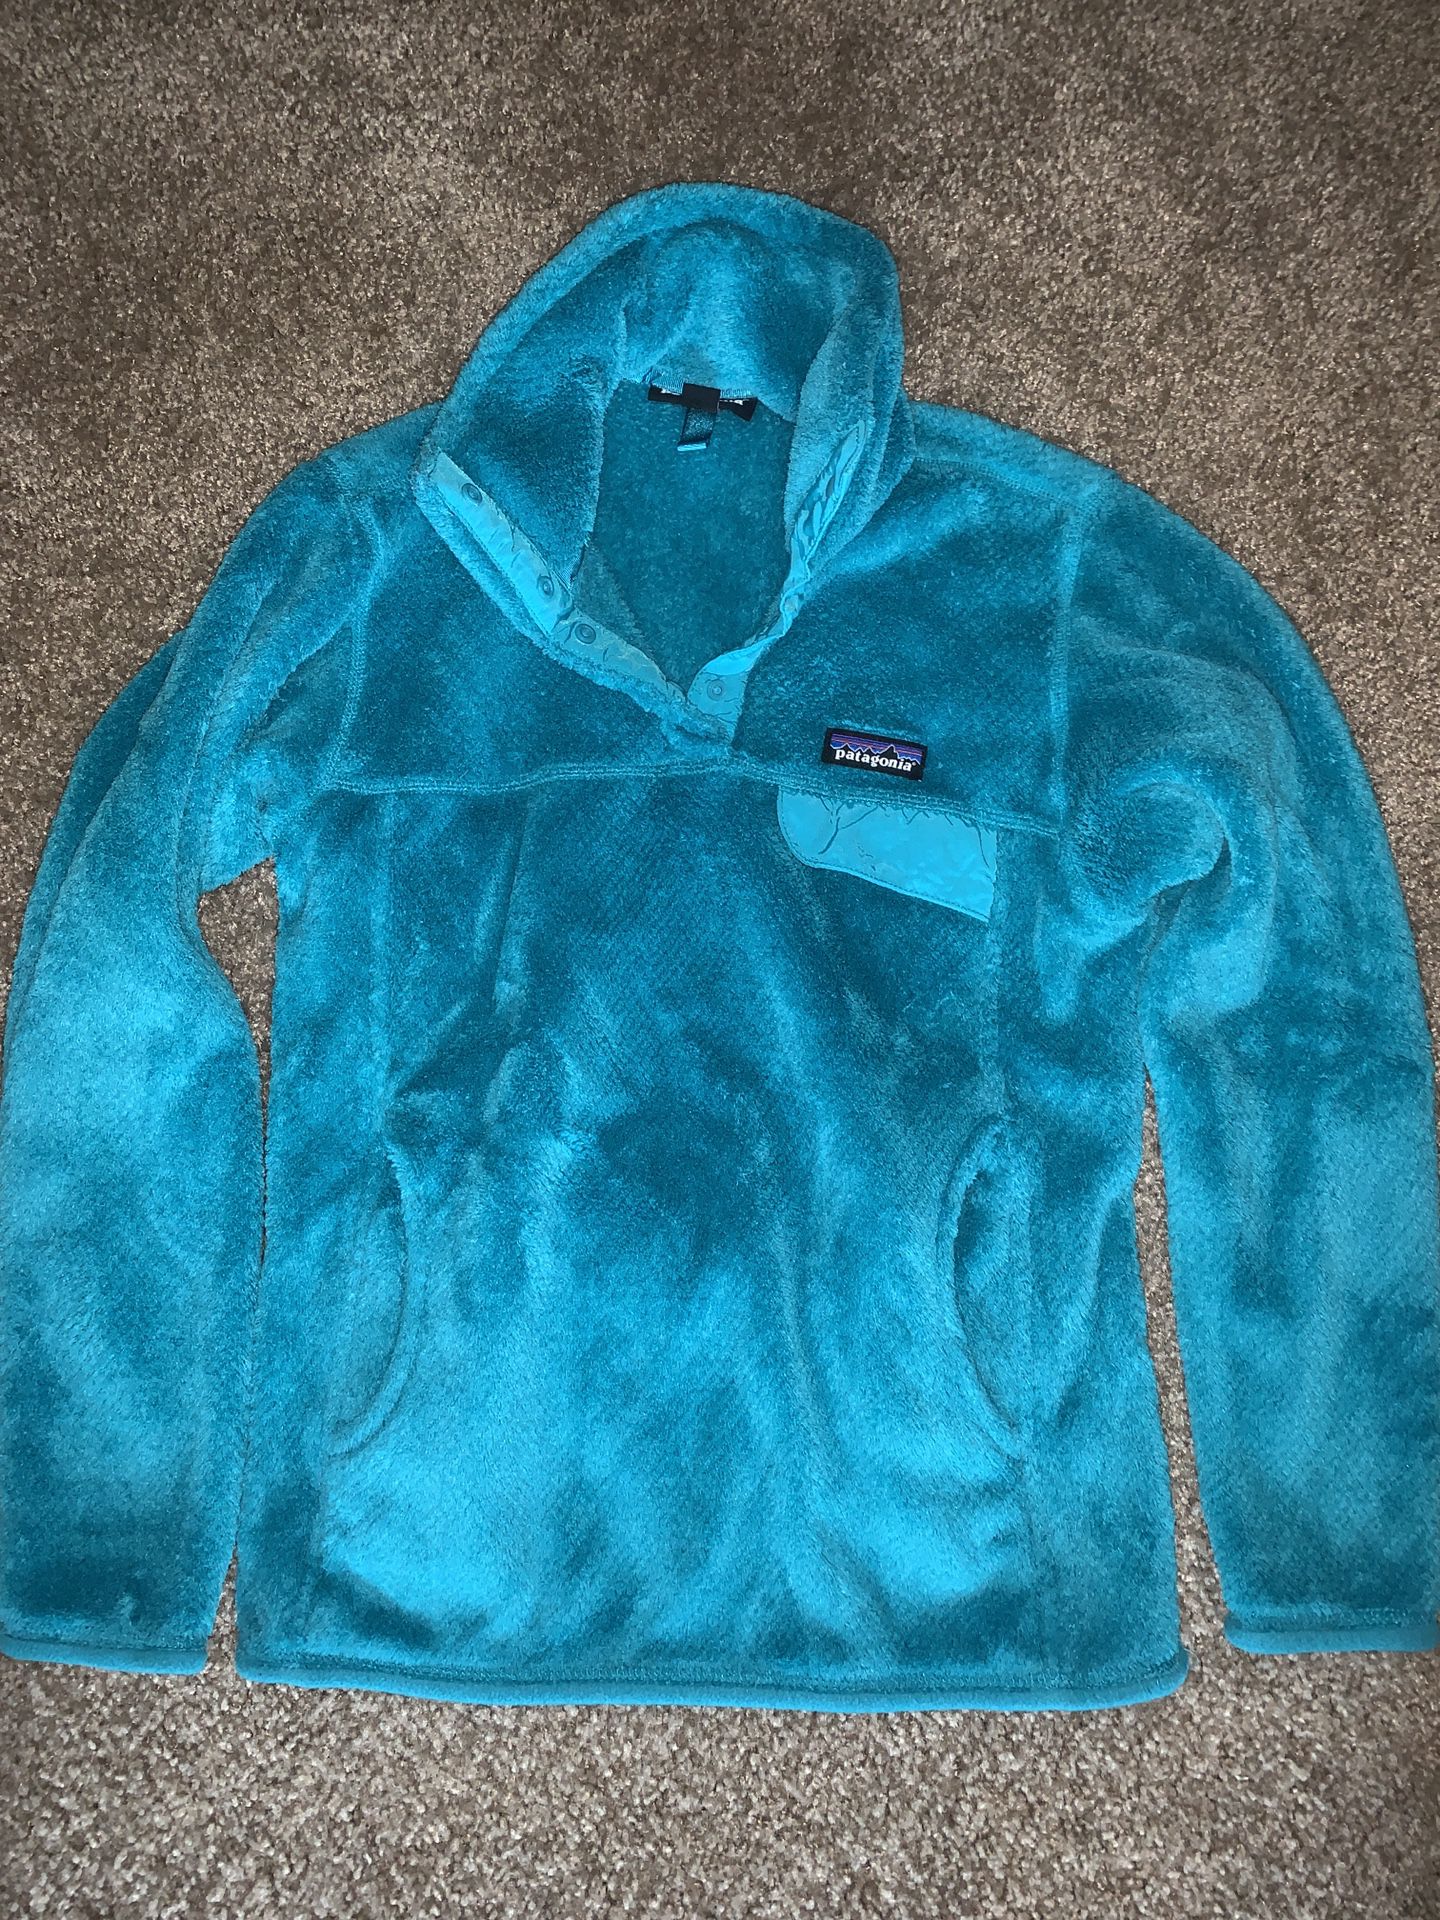 Patagonia Pullover: Women’s XS